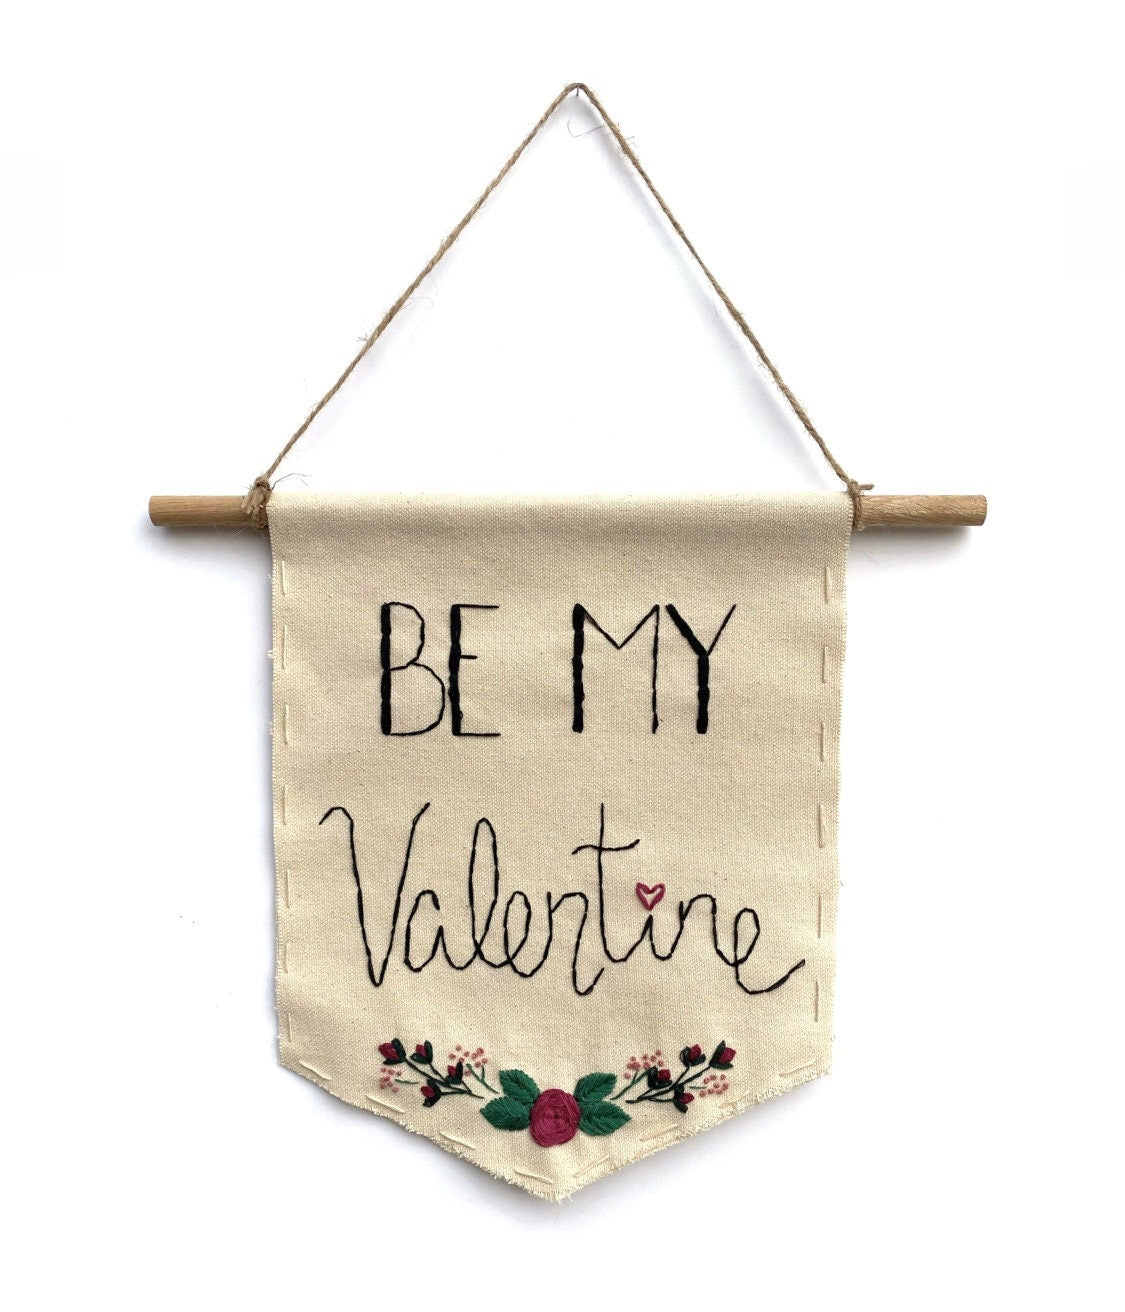 Be My Valentine Hanging Banner PDF Embroidery Pattern